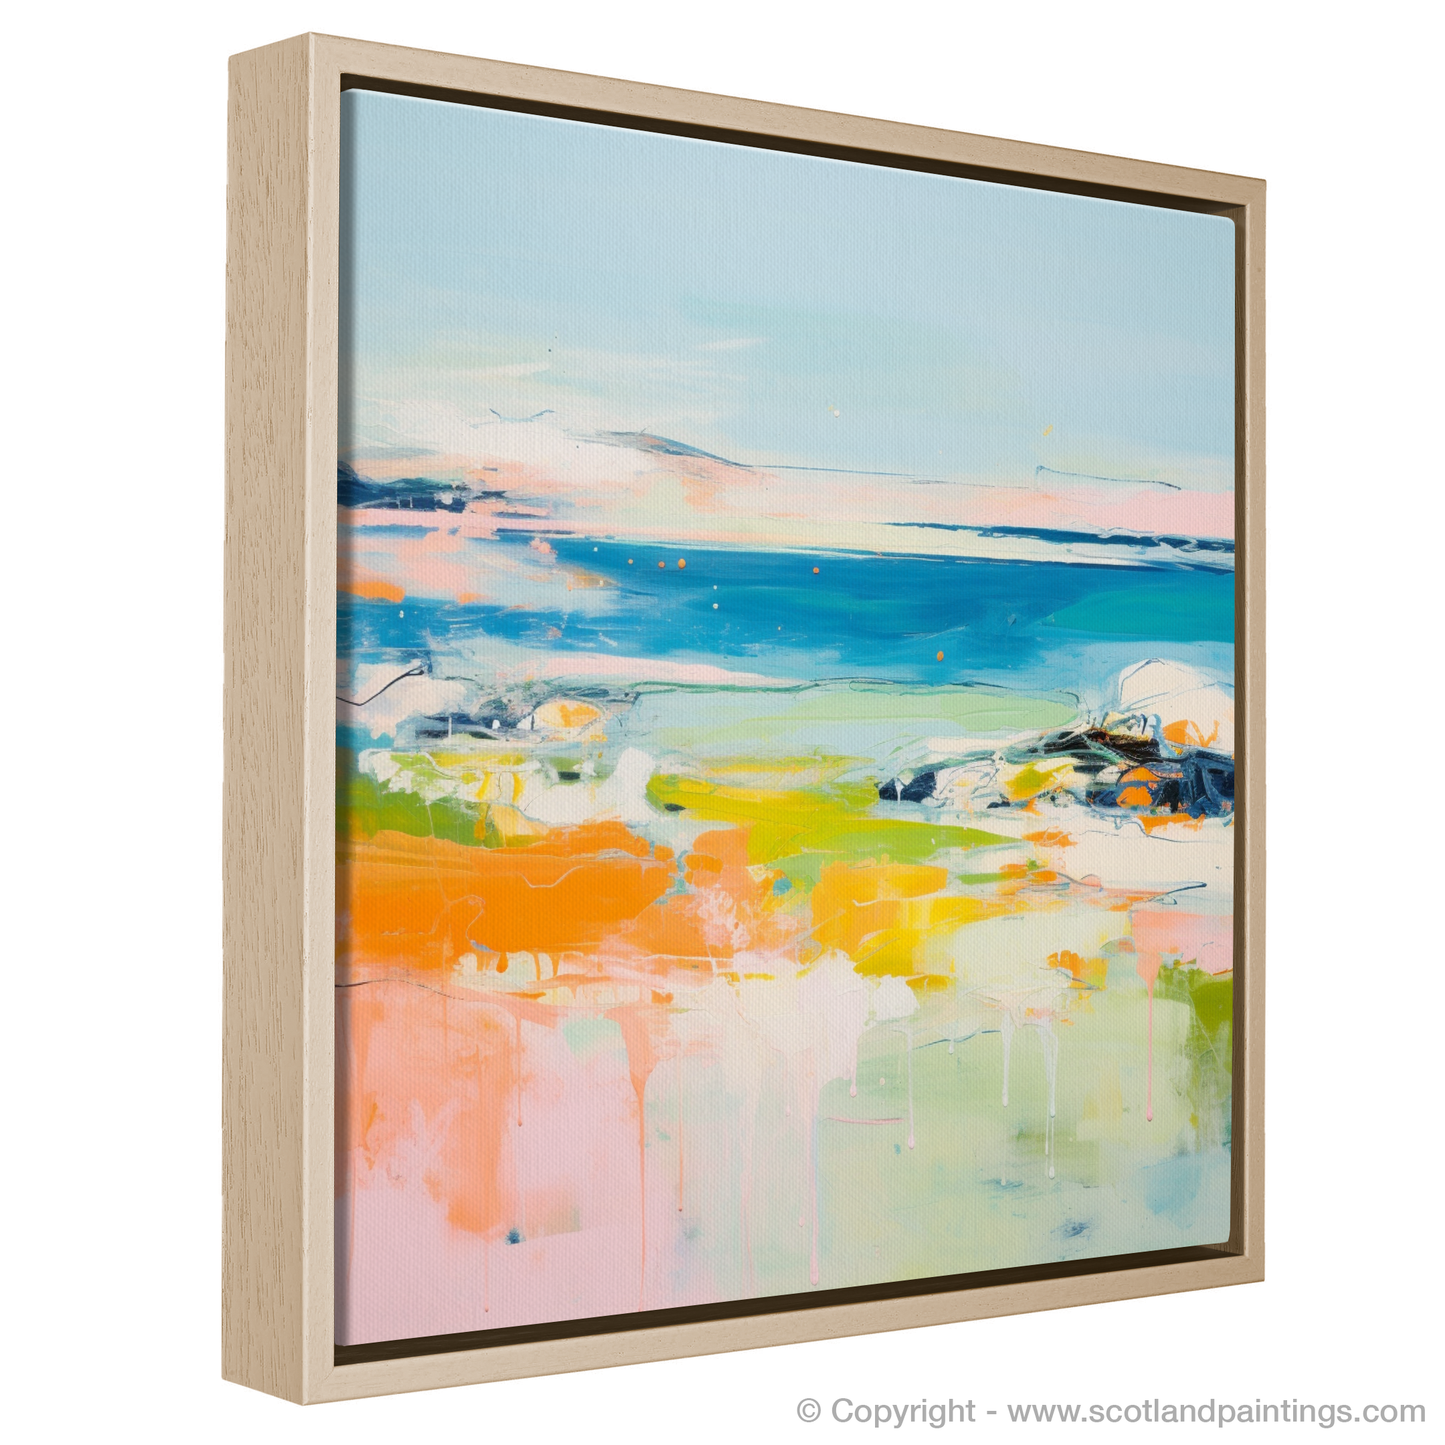 Painting and Art Print of Isle of Tiree, Inner Hebrides in summer entitled "Tiree Summer Abstraction: A Symphony of Colours and Shapes".